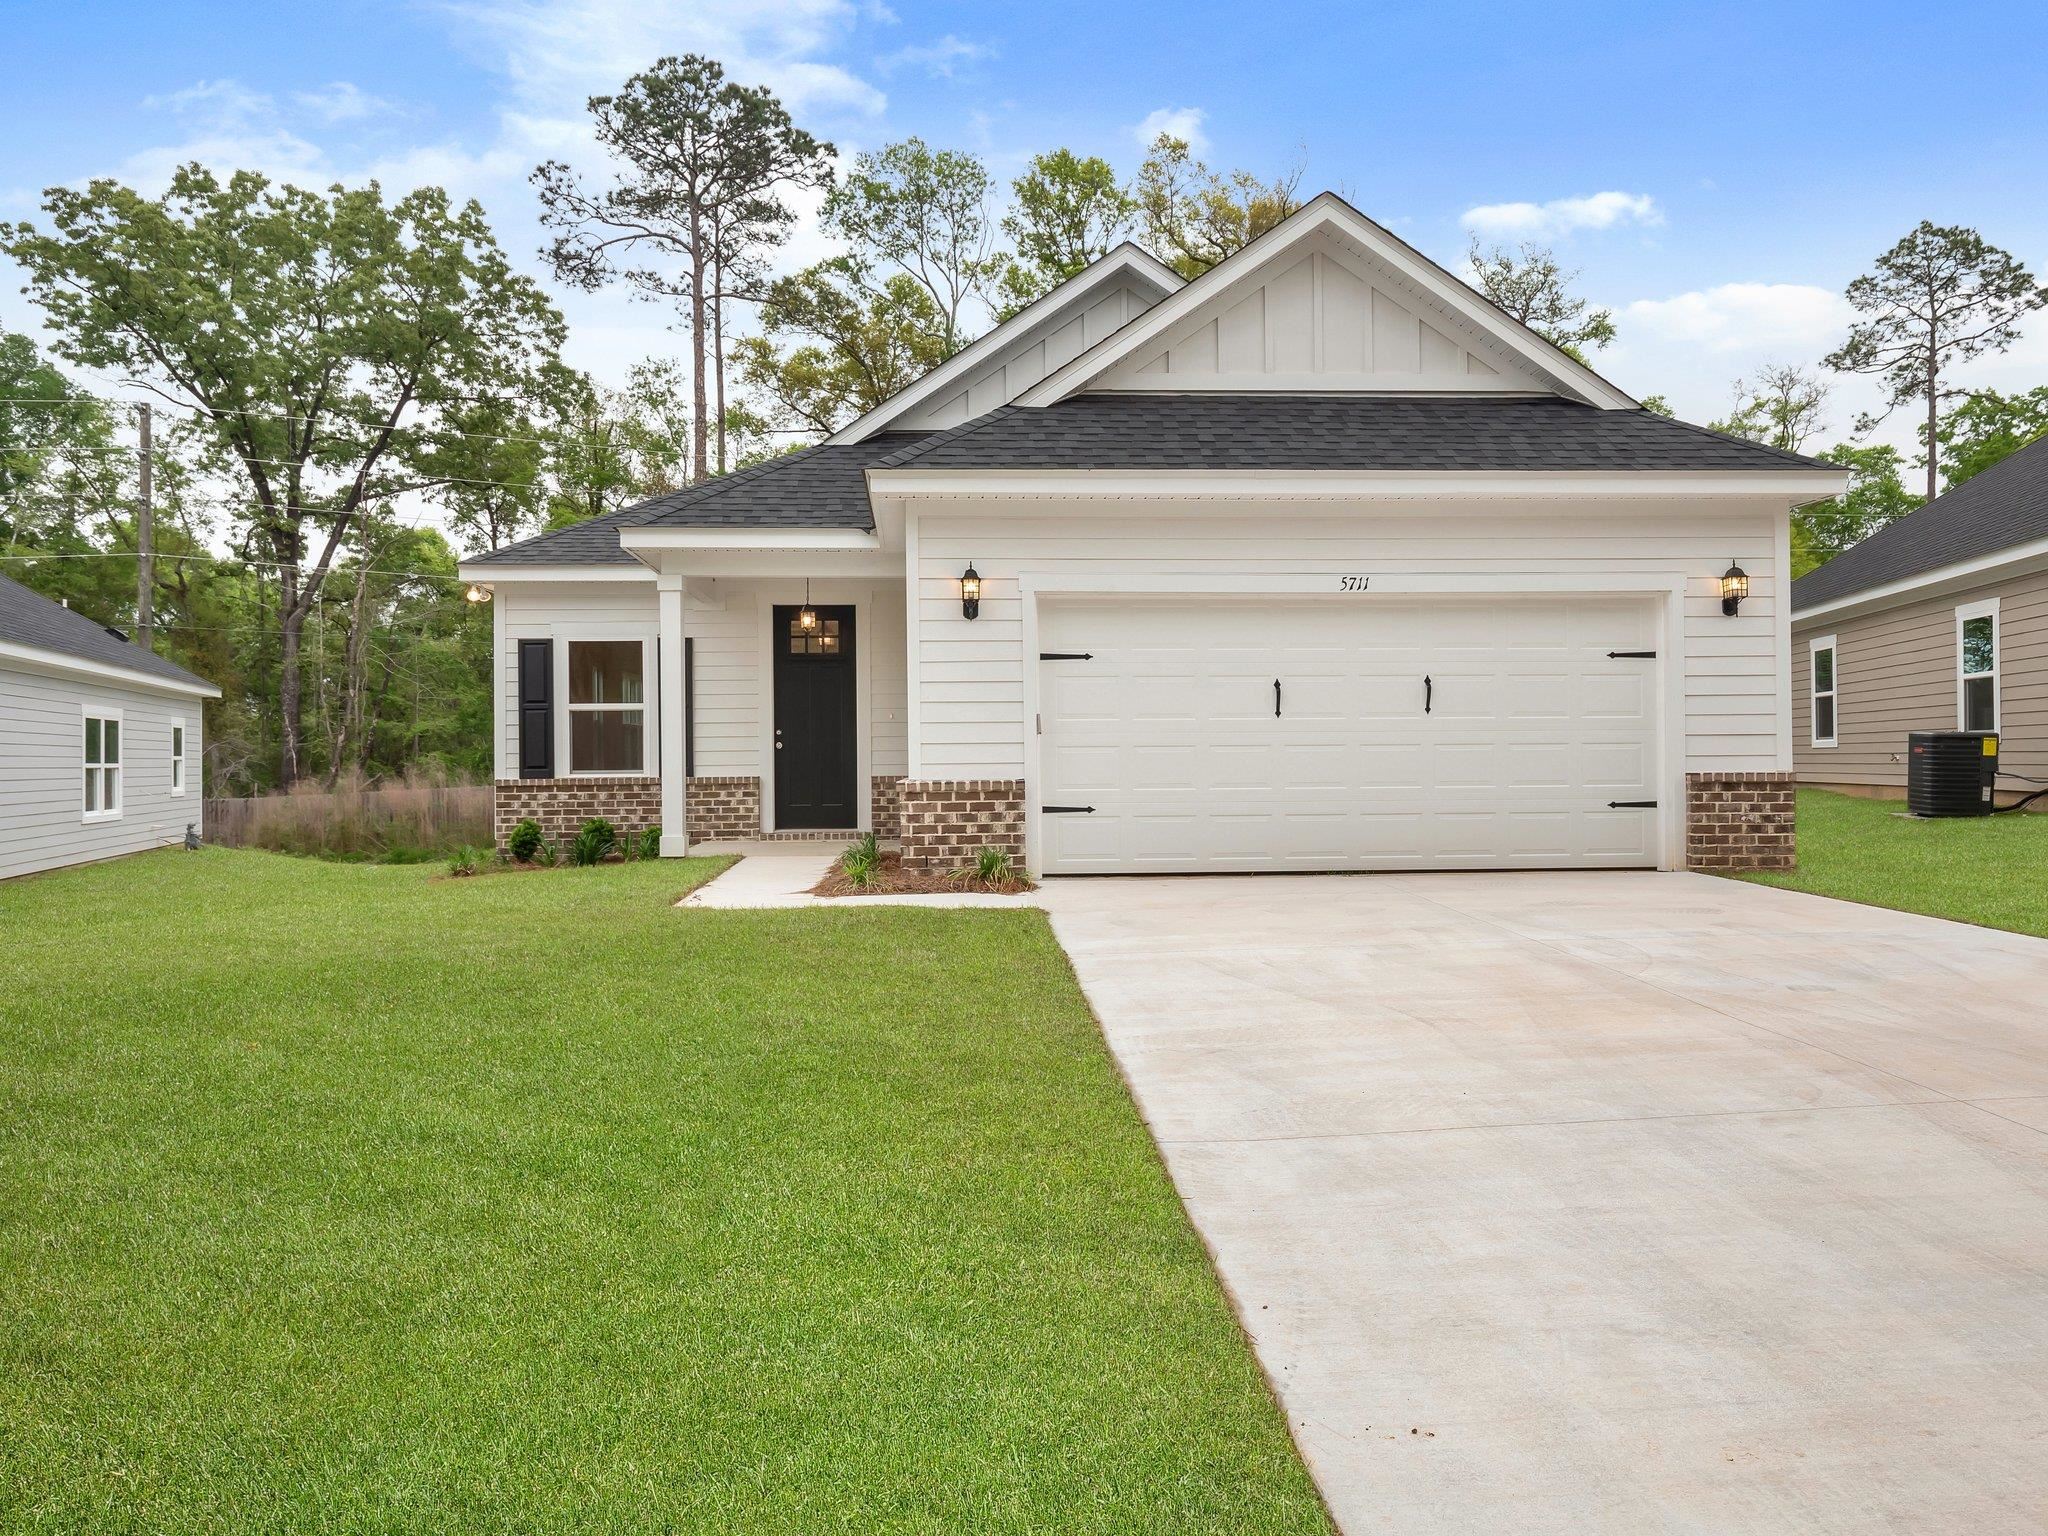 5408 River Reserve Lane,TALLAHASSEE,Florida 32303,3 Bedrooms Bedrooms,2 BathroomsBathrooms,Detached single family,5408 River Reserve Lane,365384